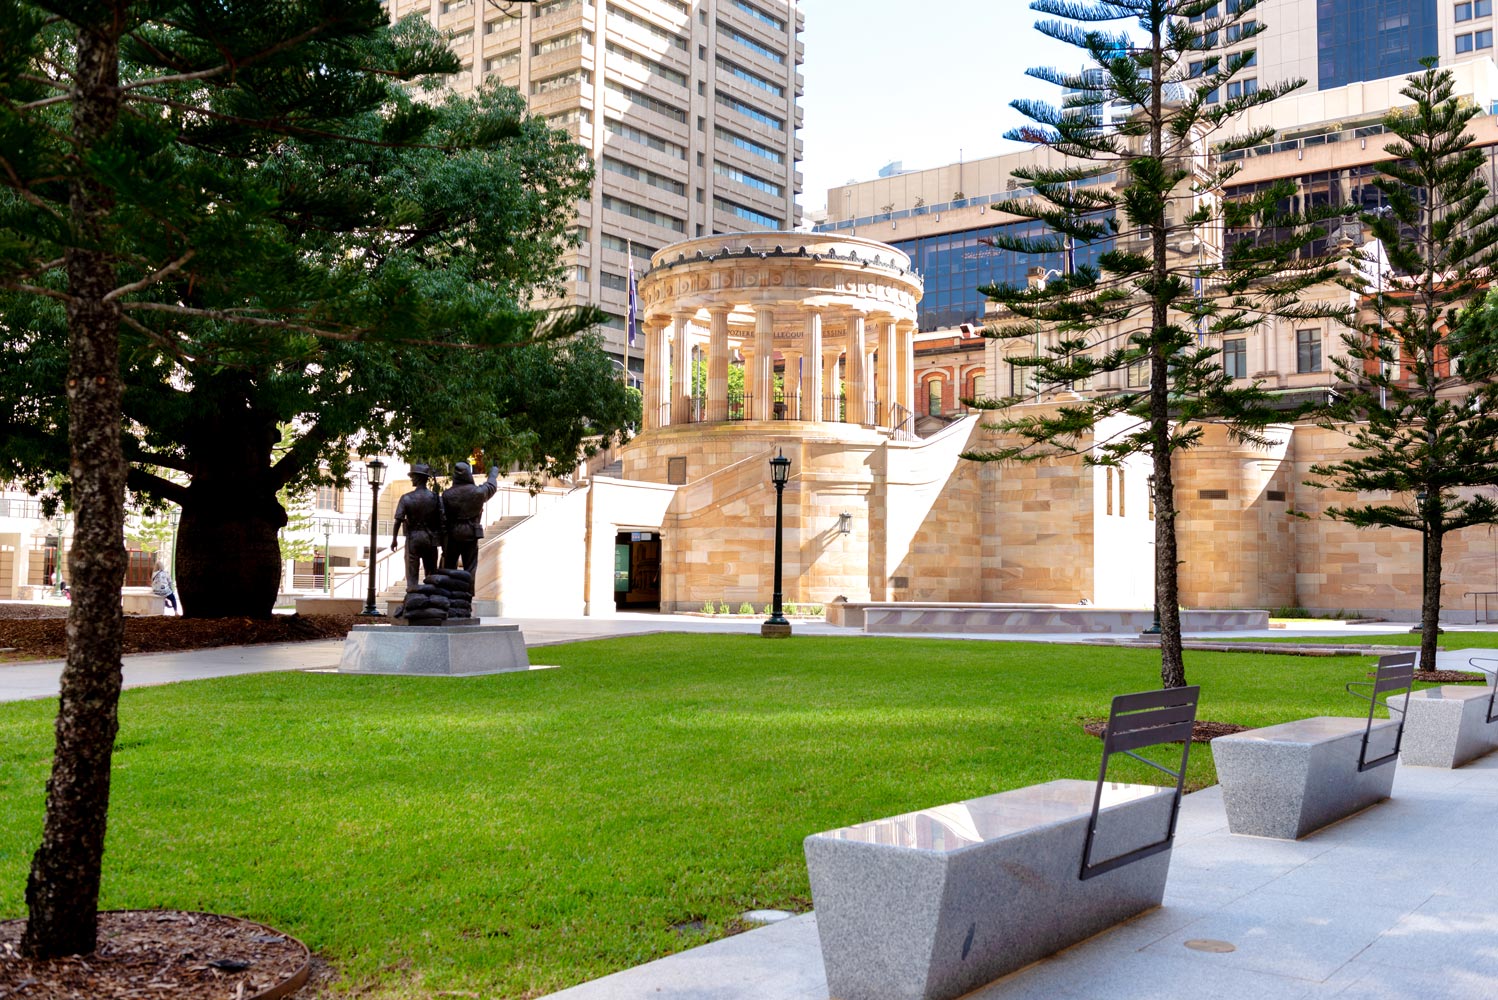 Anzac Square parkland with trees, a statue, benches, grass and the Shrine of Remembrance in the centre. 